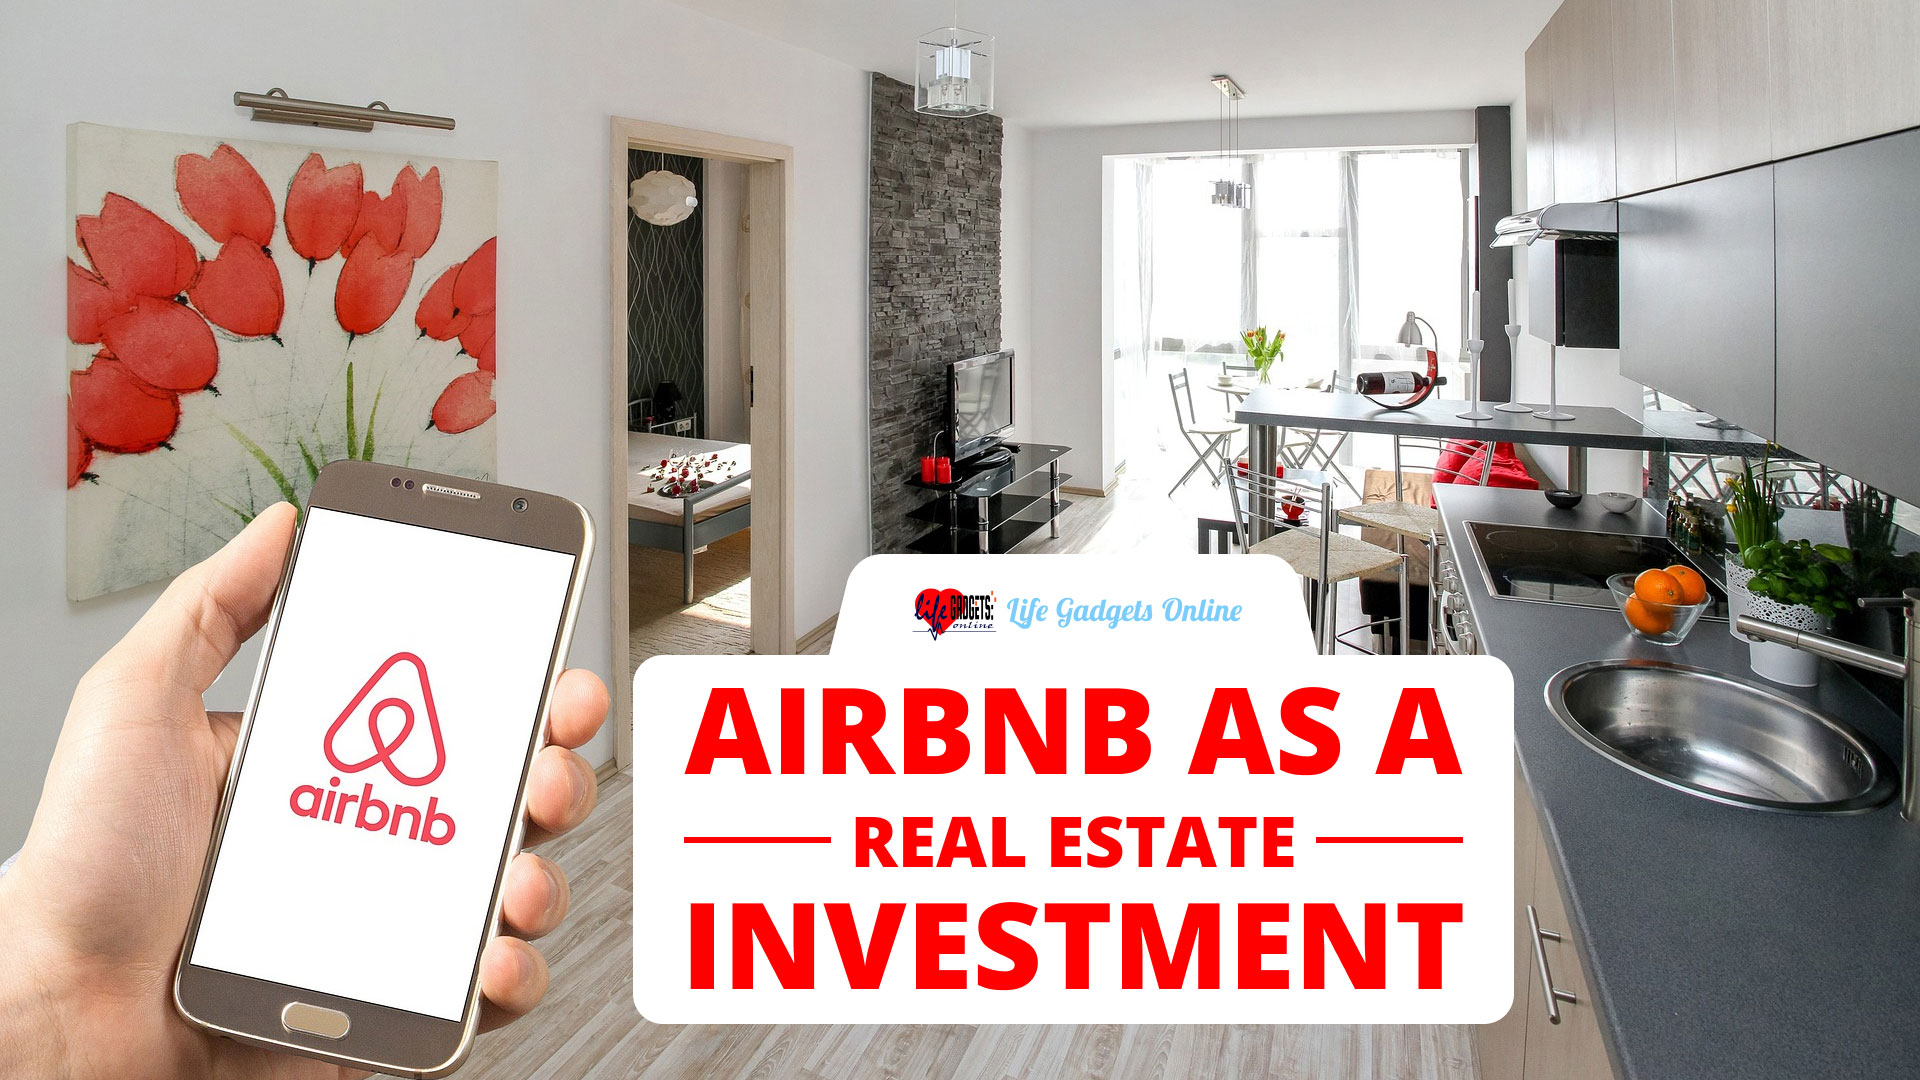 Airbnb as a Real Estate Investment